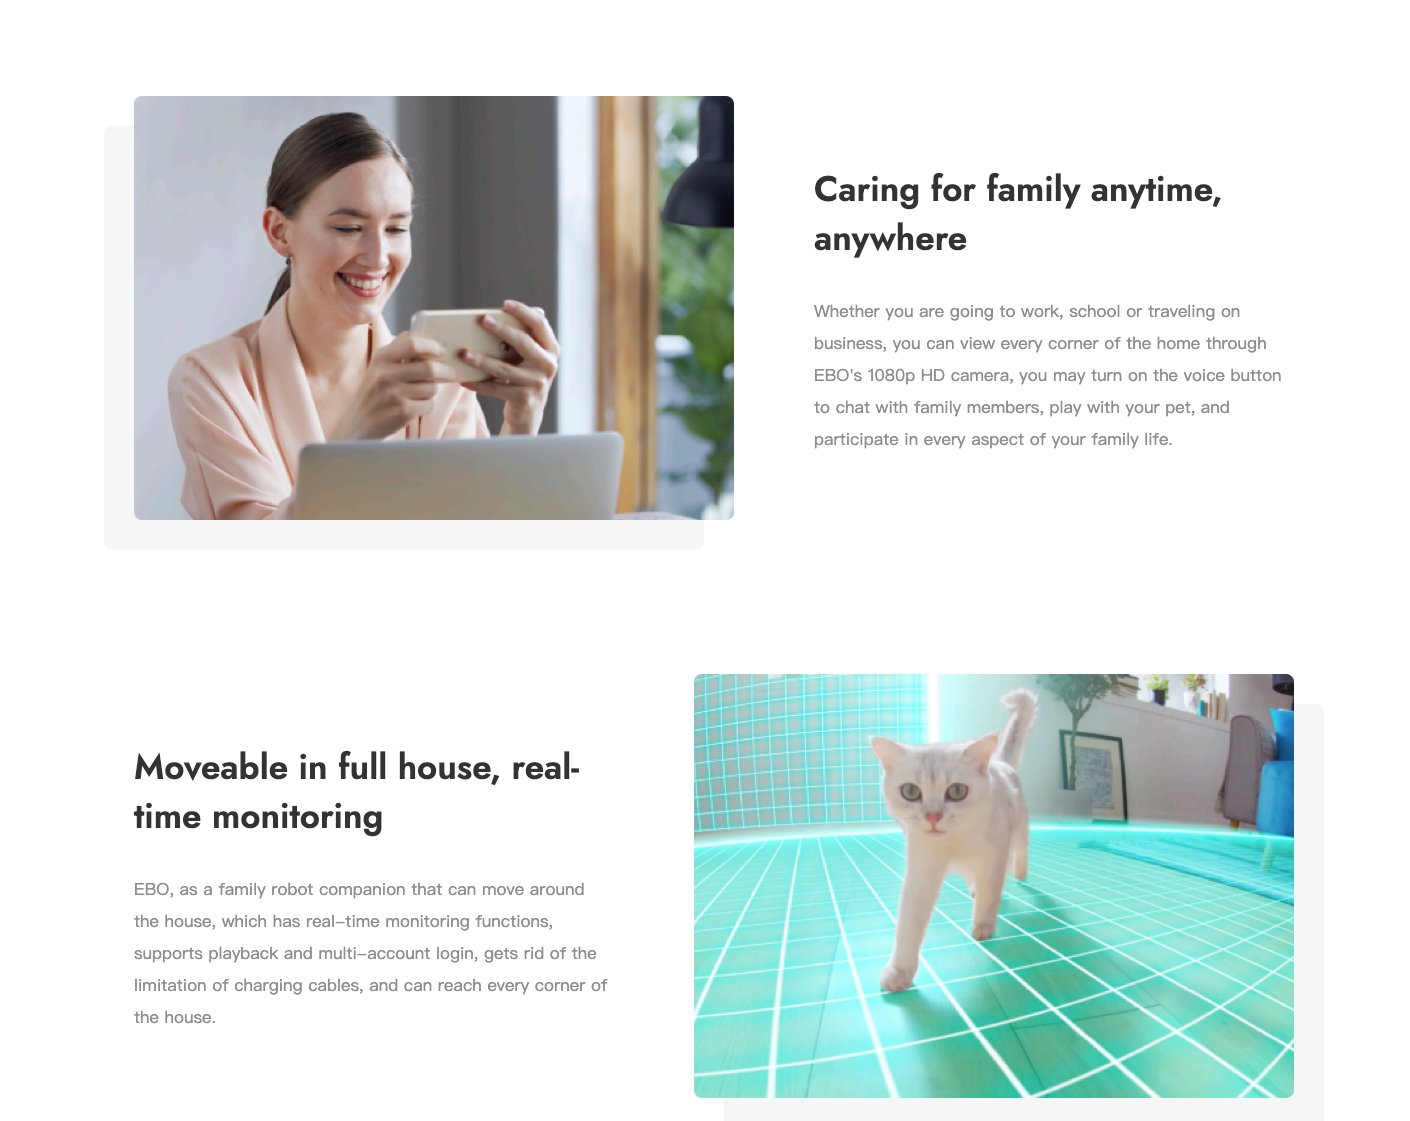 EBO AIR | Full house mobile monitoring | Remotely connects with your loved ones